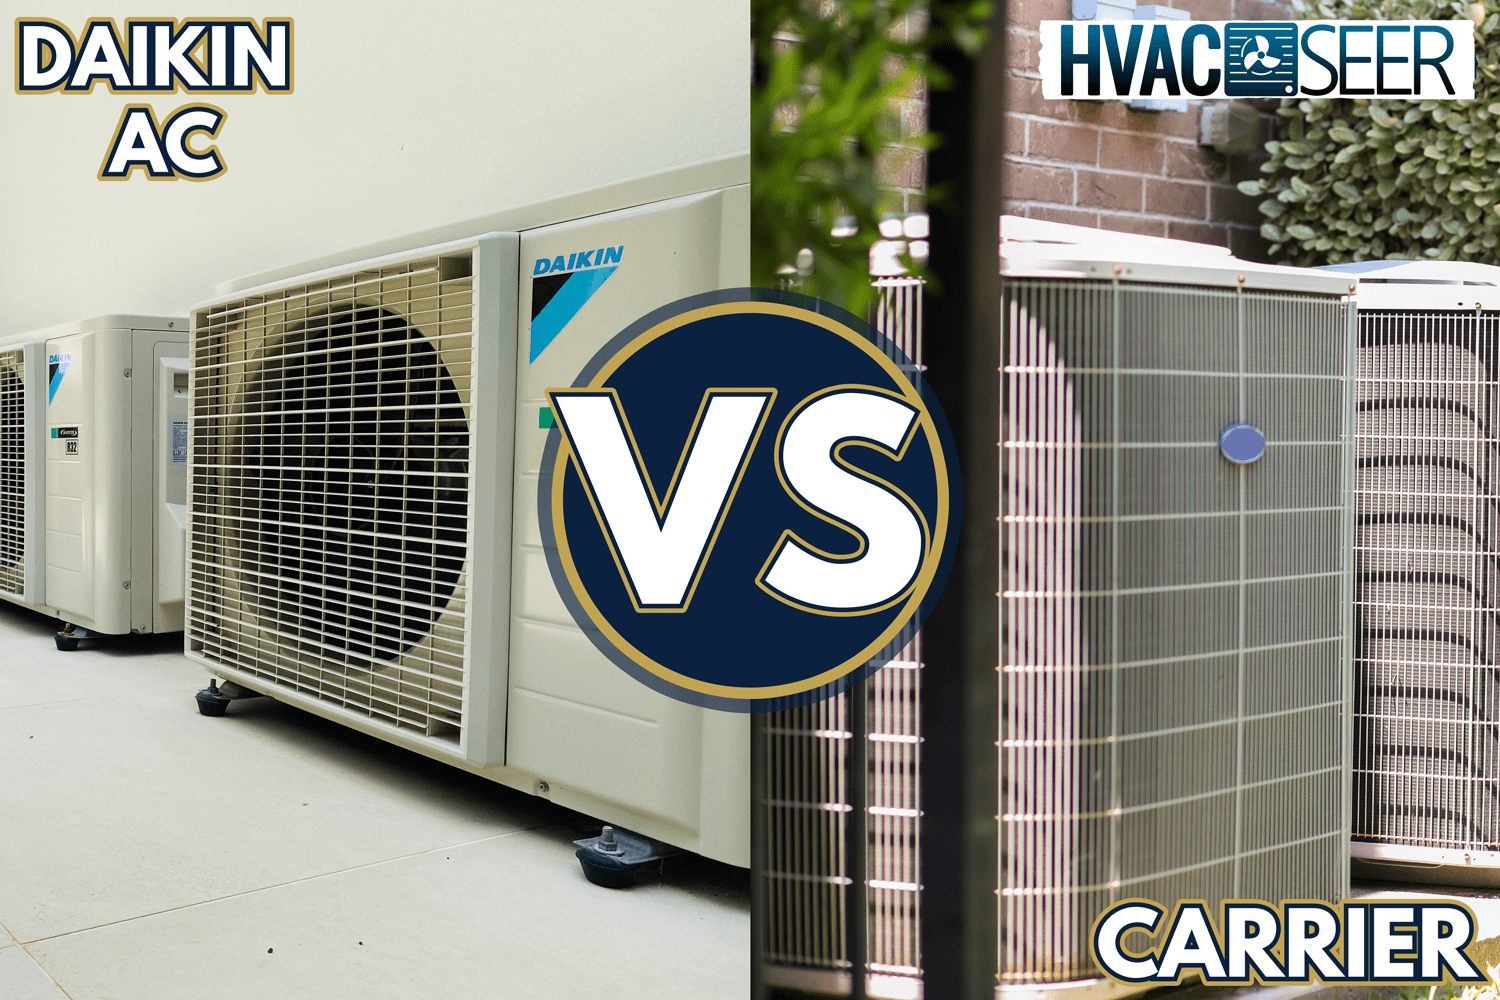 Latin descent, blue collar air conditioner repairman working at residential home. He prepares to begin work by gathering appropriate tools and referring to digital tablet. - Daikin AC Vs Carrier Which To Choose